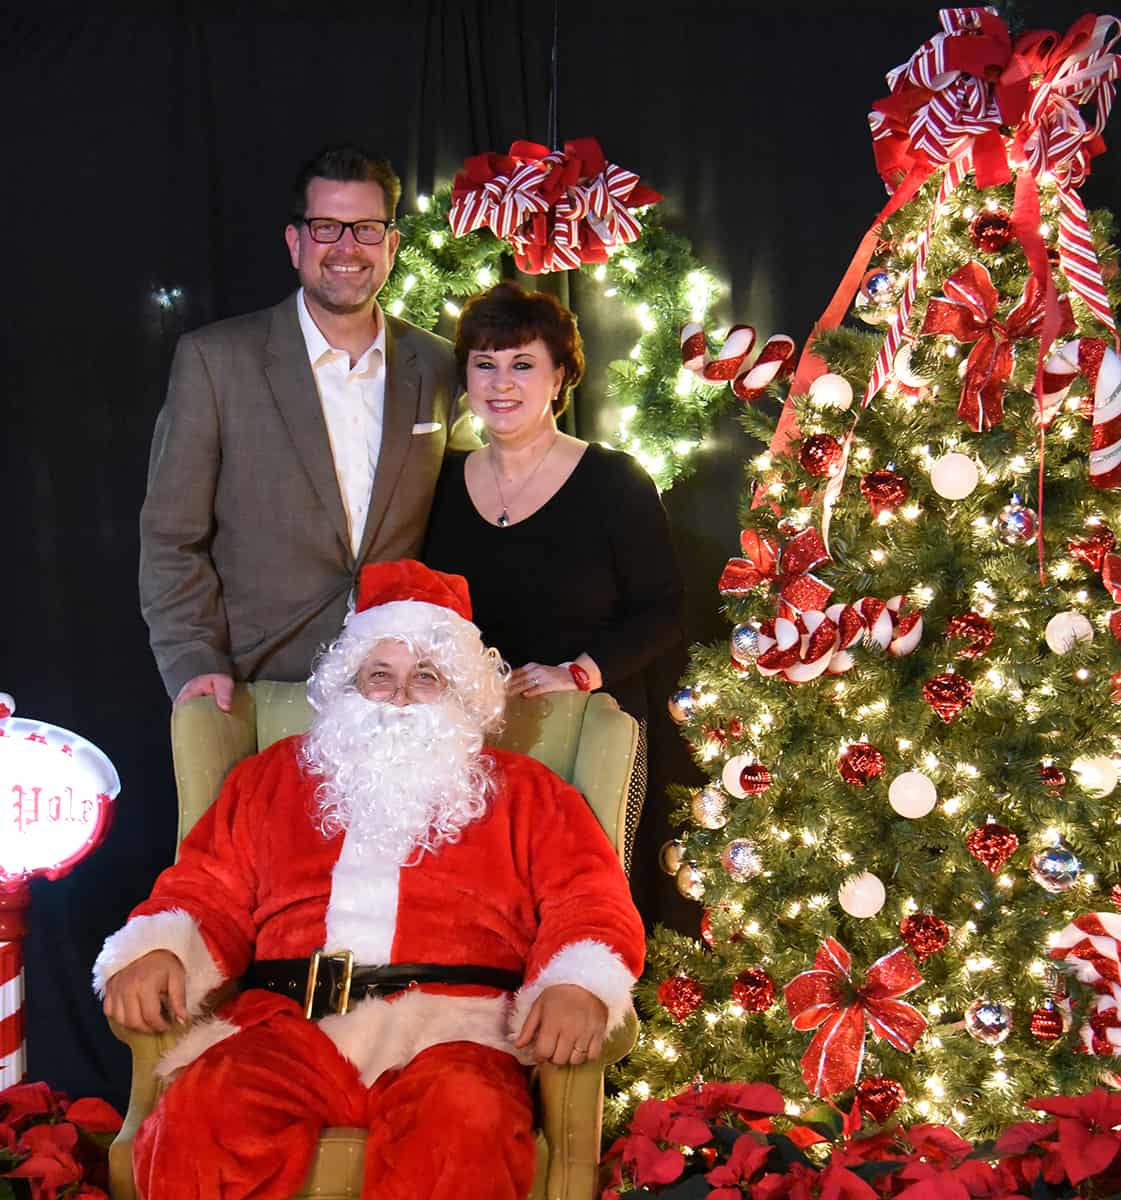 SGTC President Dr. John Watford and his wife, Barbara are shown above with Santa at the SGTC Light Up Your Future event.